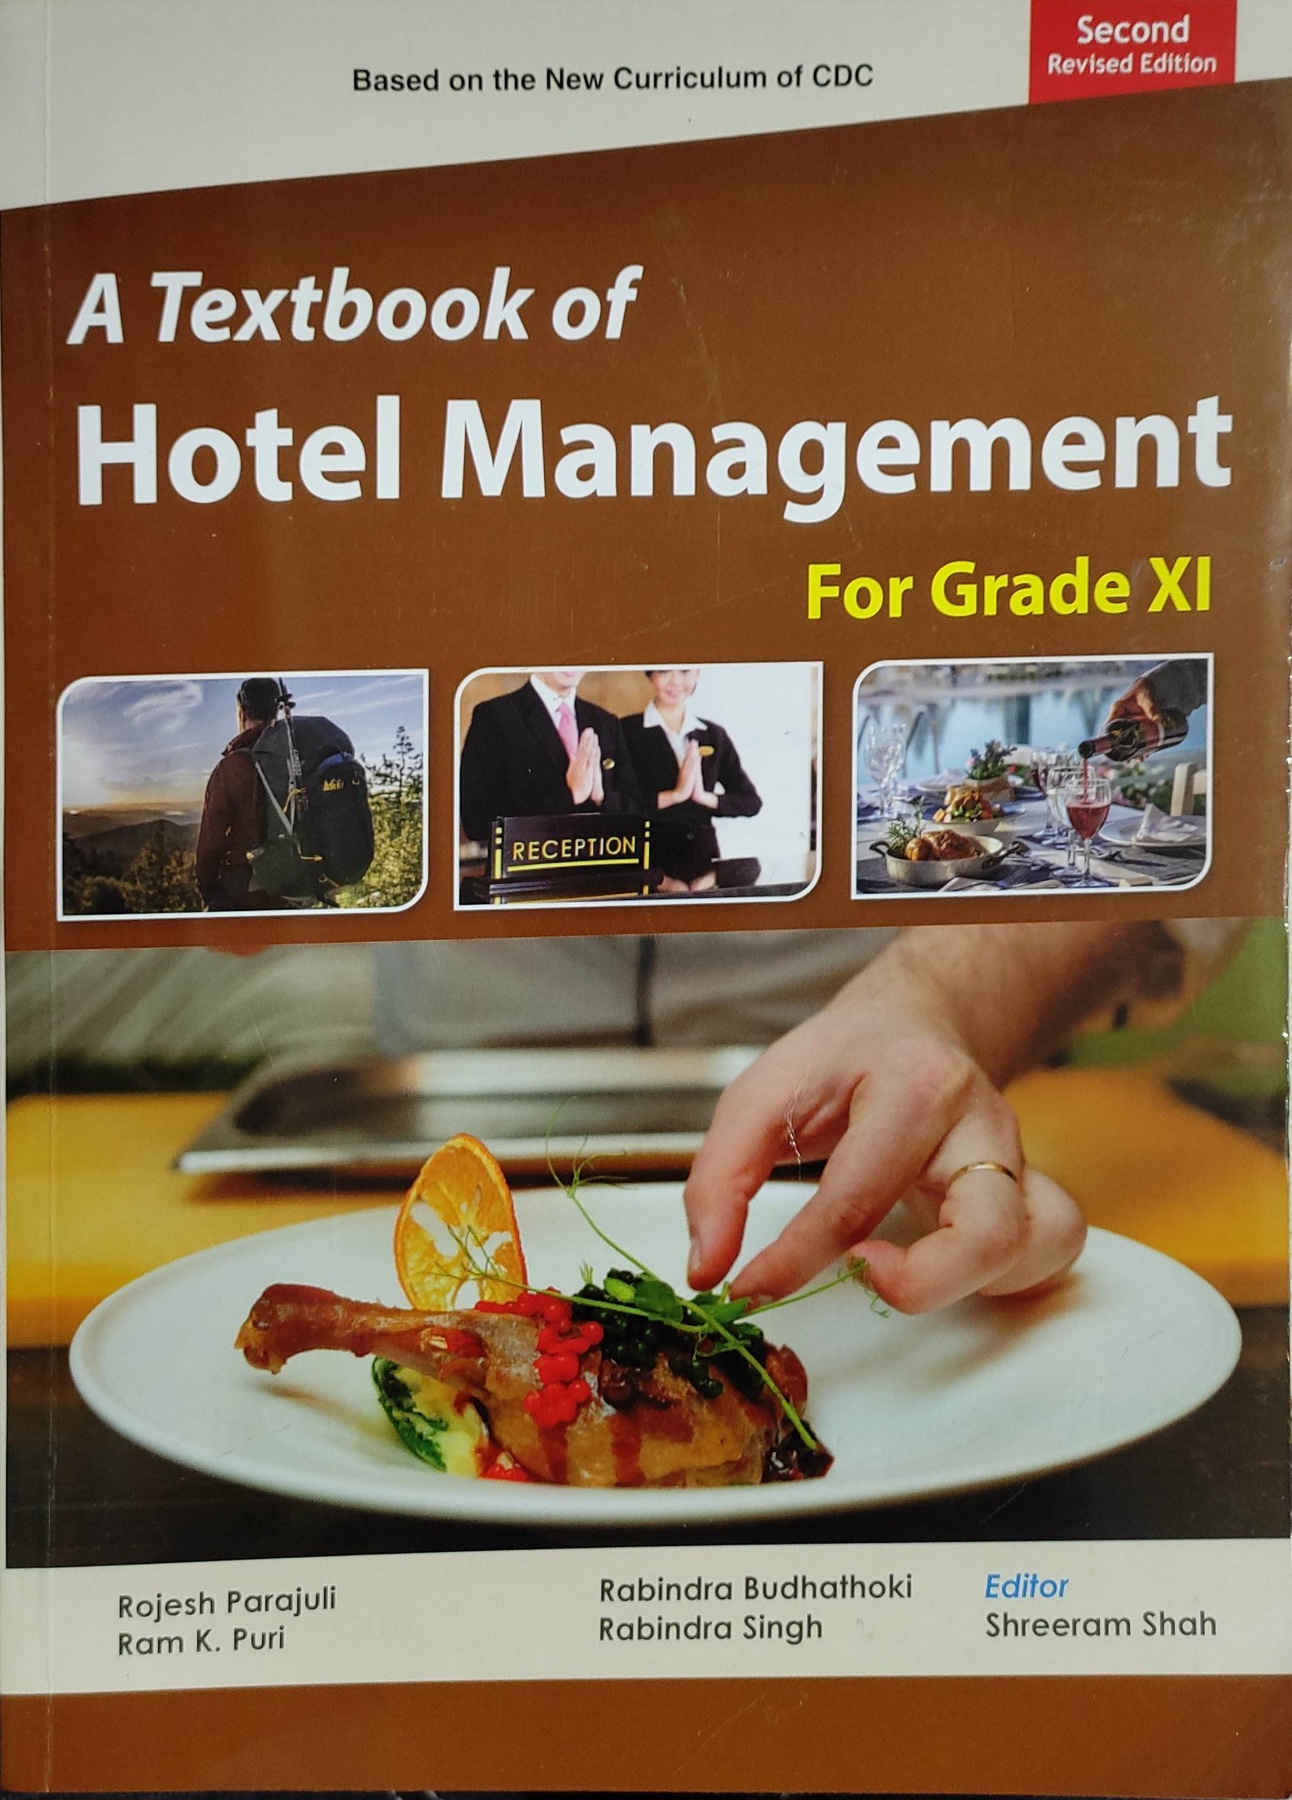 A Textbook of Hotel Management For Grade XI